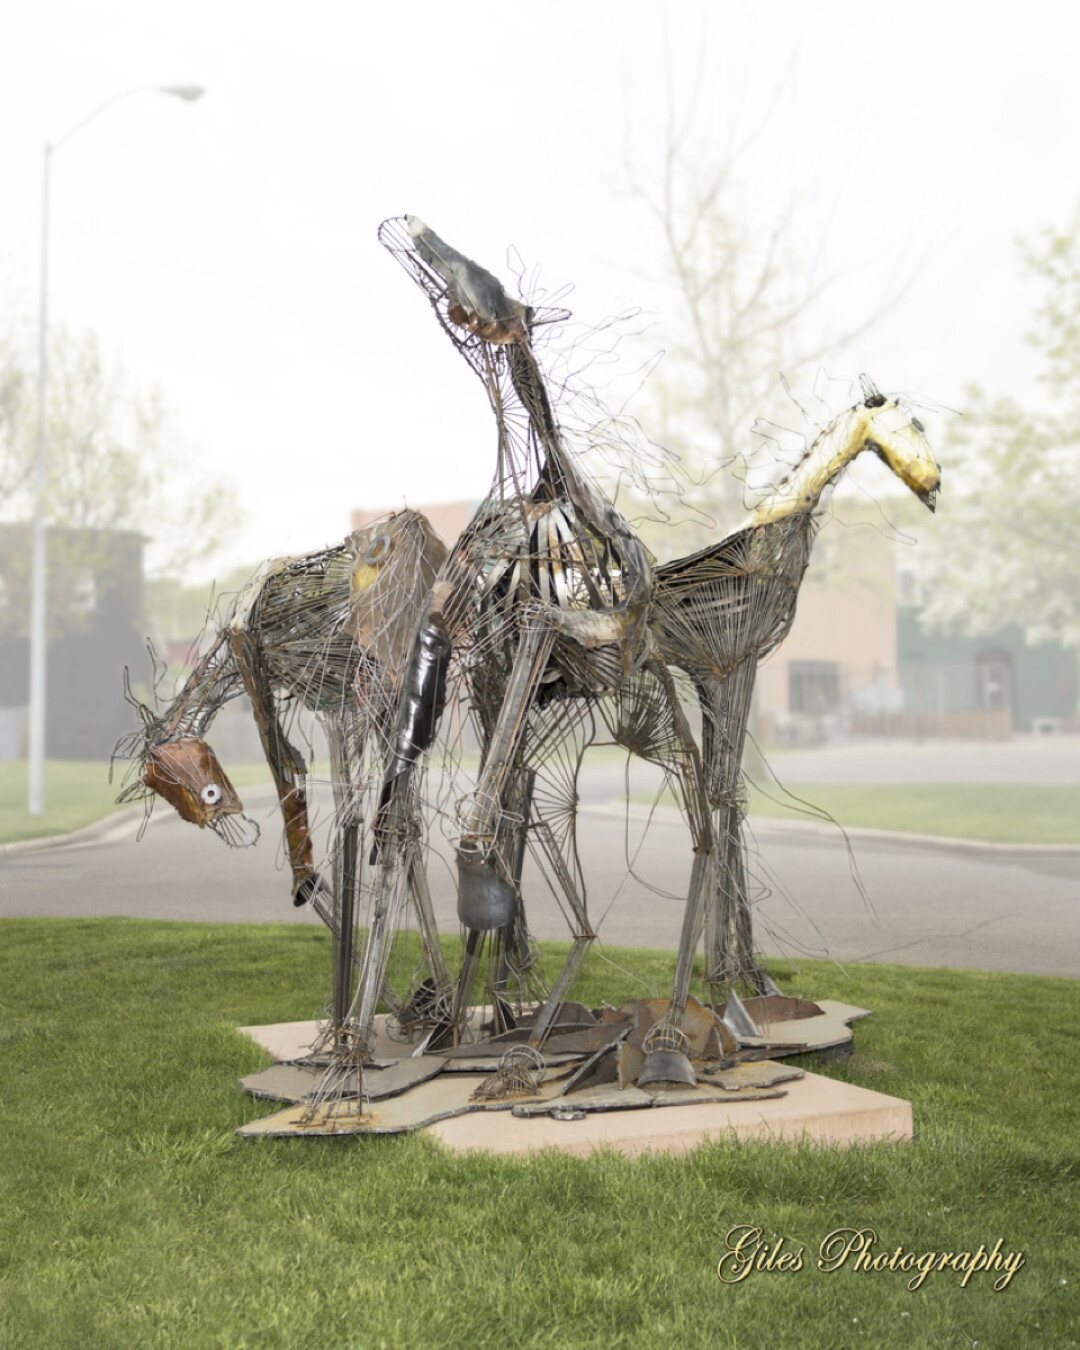 Best of Show-Other Materials: “Tres Caballos” by Terry Meyer